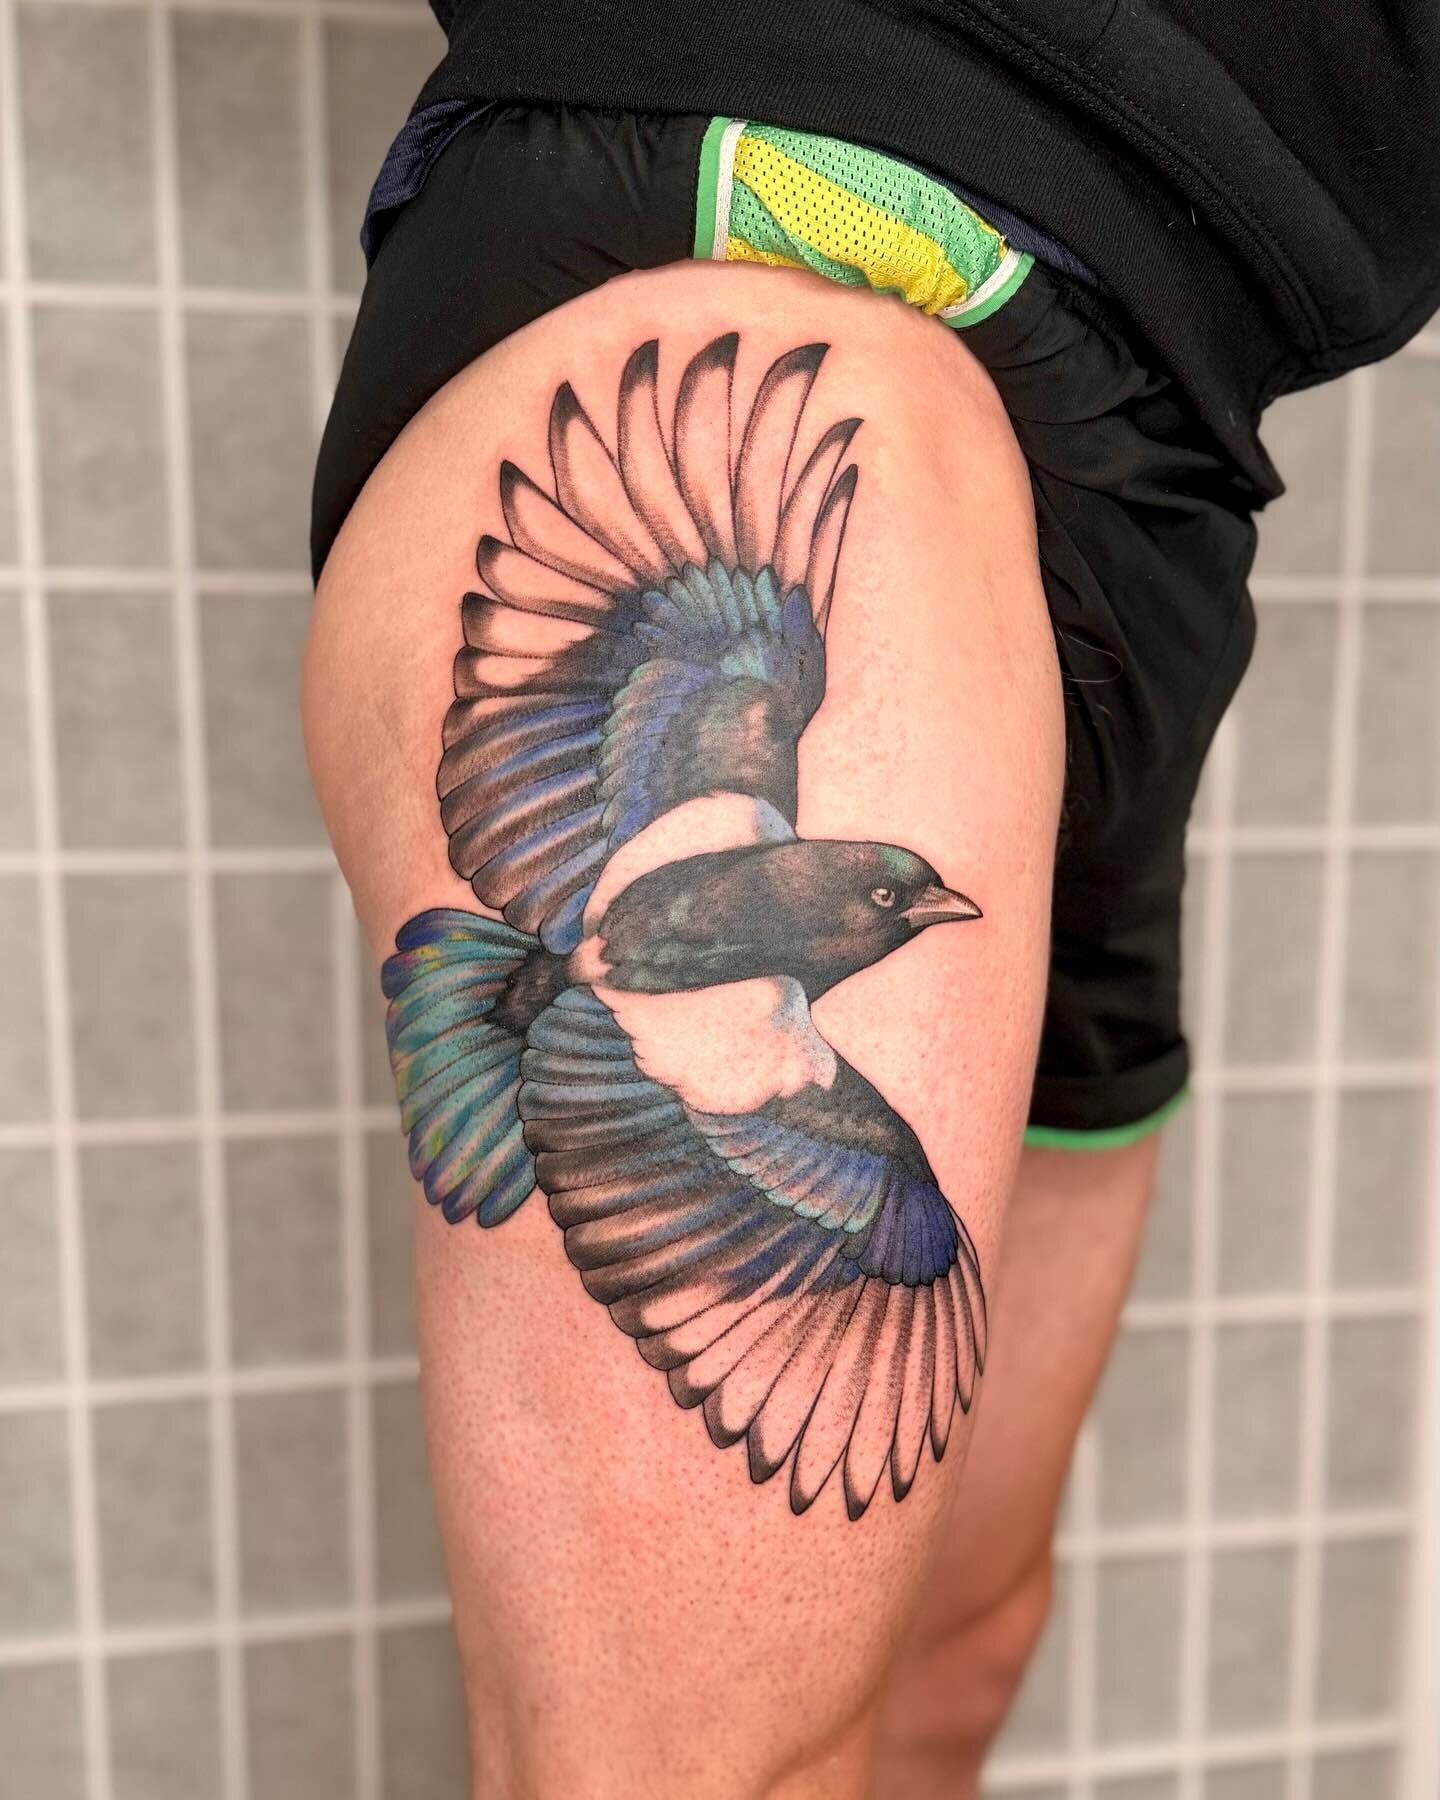 The Magpie an Omen of Luck 🍀🐦&zwj;⬛
Wishing everyone extra luck and love to start off the New Year! Thank you Nialls for your trust during this project! What an honor to help you start your bird leg! You sat like a champ and were great company. So 